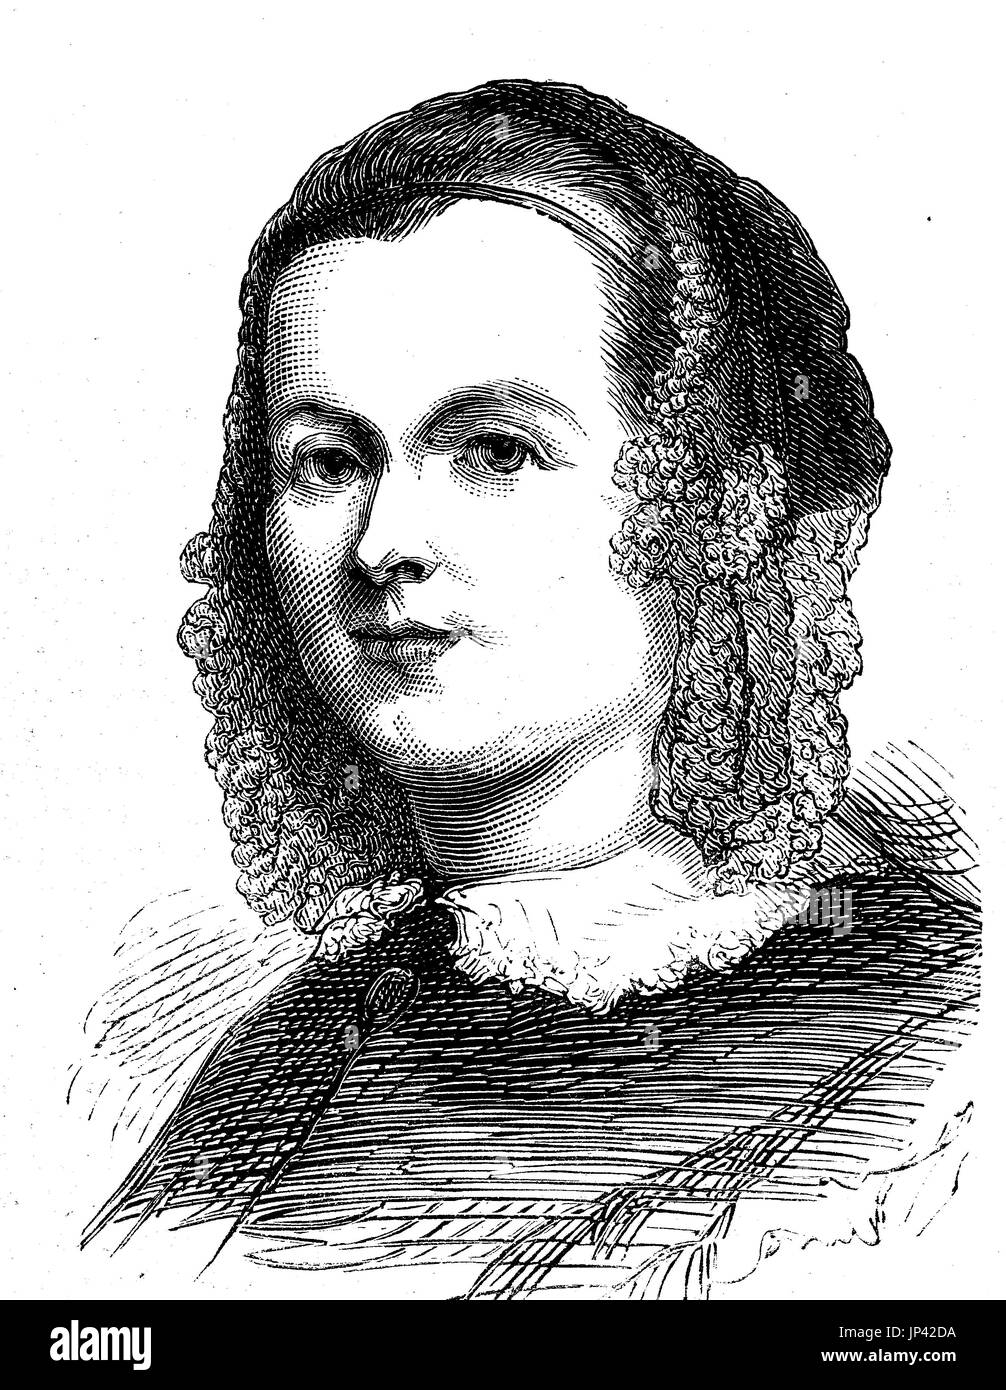 Caroline Chisholm, May 30, 1808 - March 25, 1877, was an English humanitarian. She became a saint on 16 May in the Calendar of saints of the Church of England, digital improved reproduction of a woodcut publication from the year 1888 Stock Photo